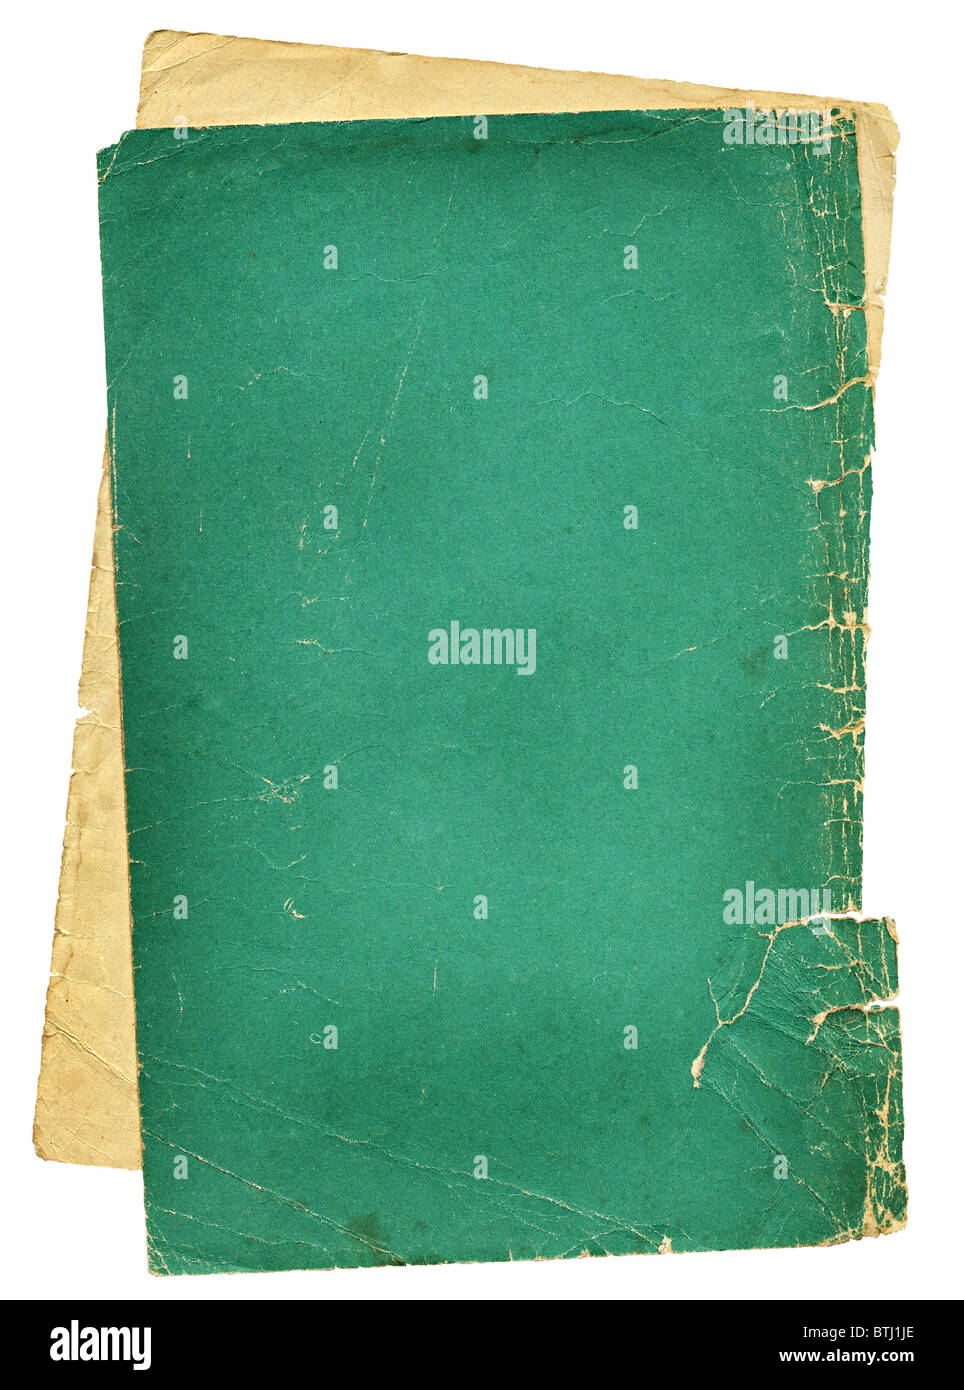 The old green shabby paper cover Stock Photo